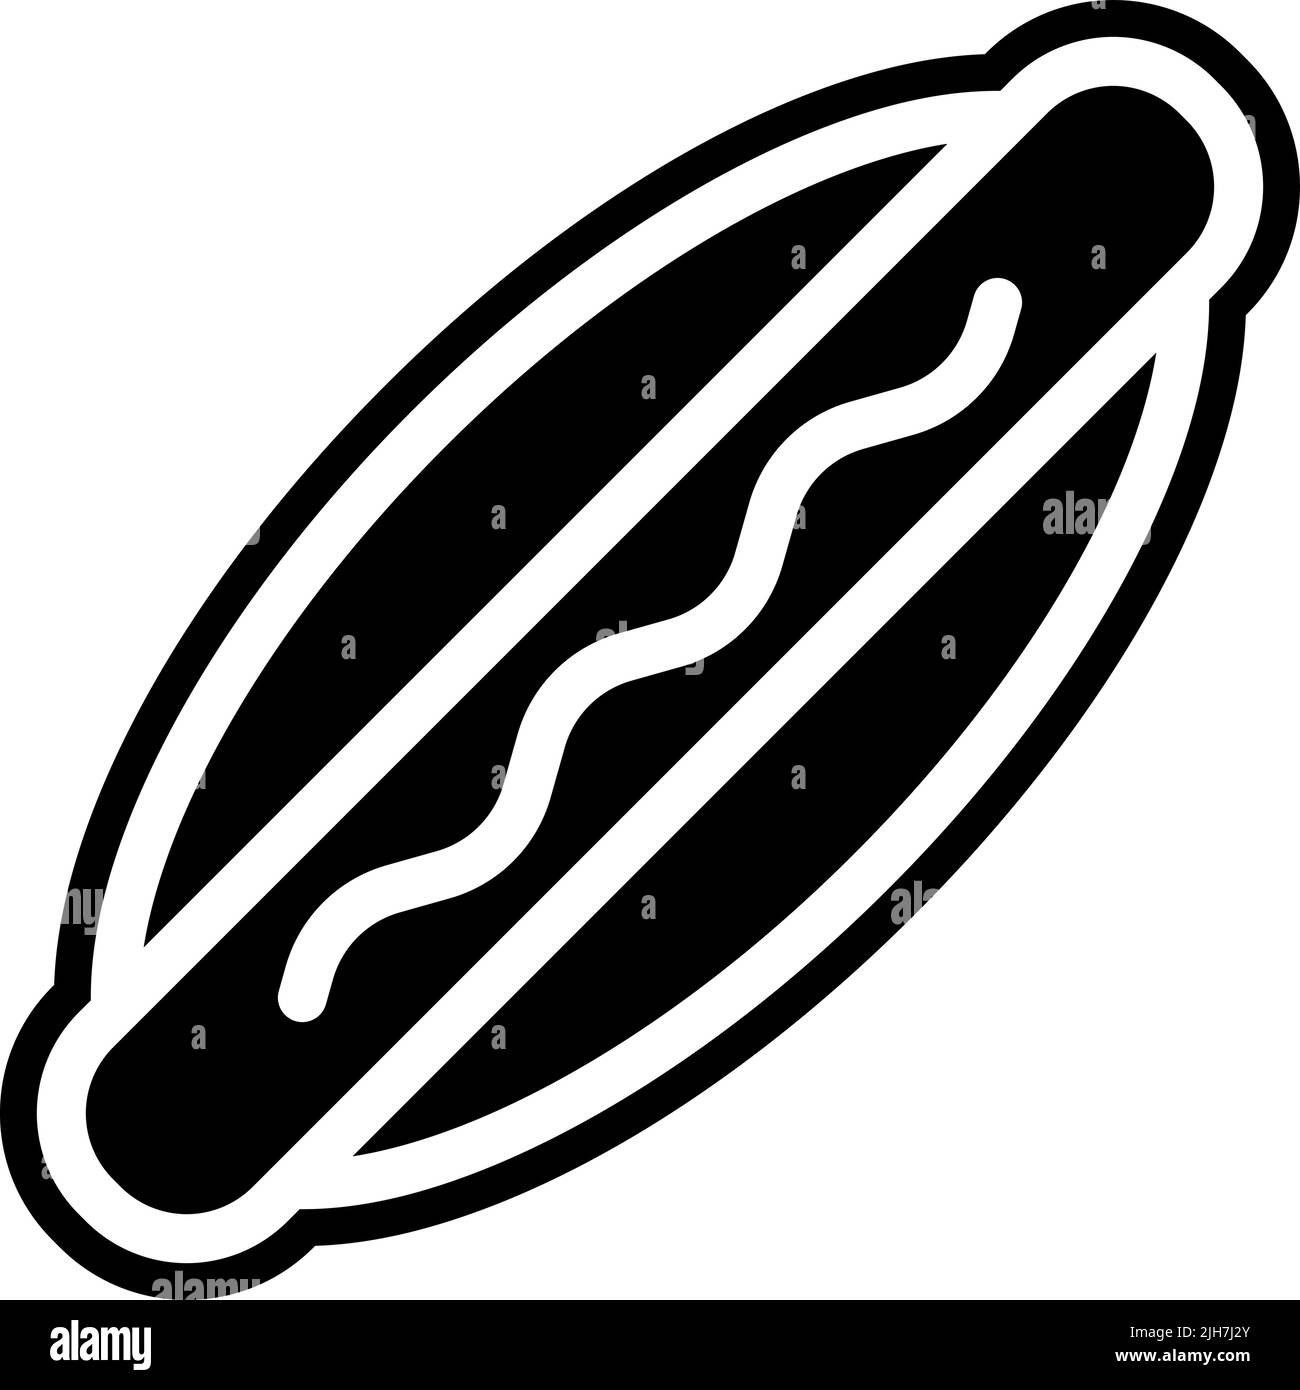 Food hot dog icon Stock Vector